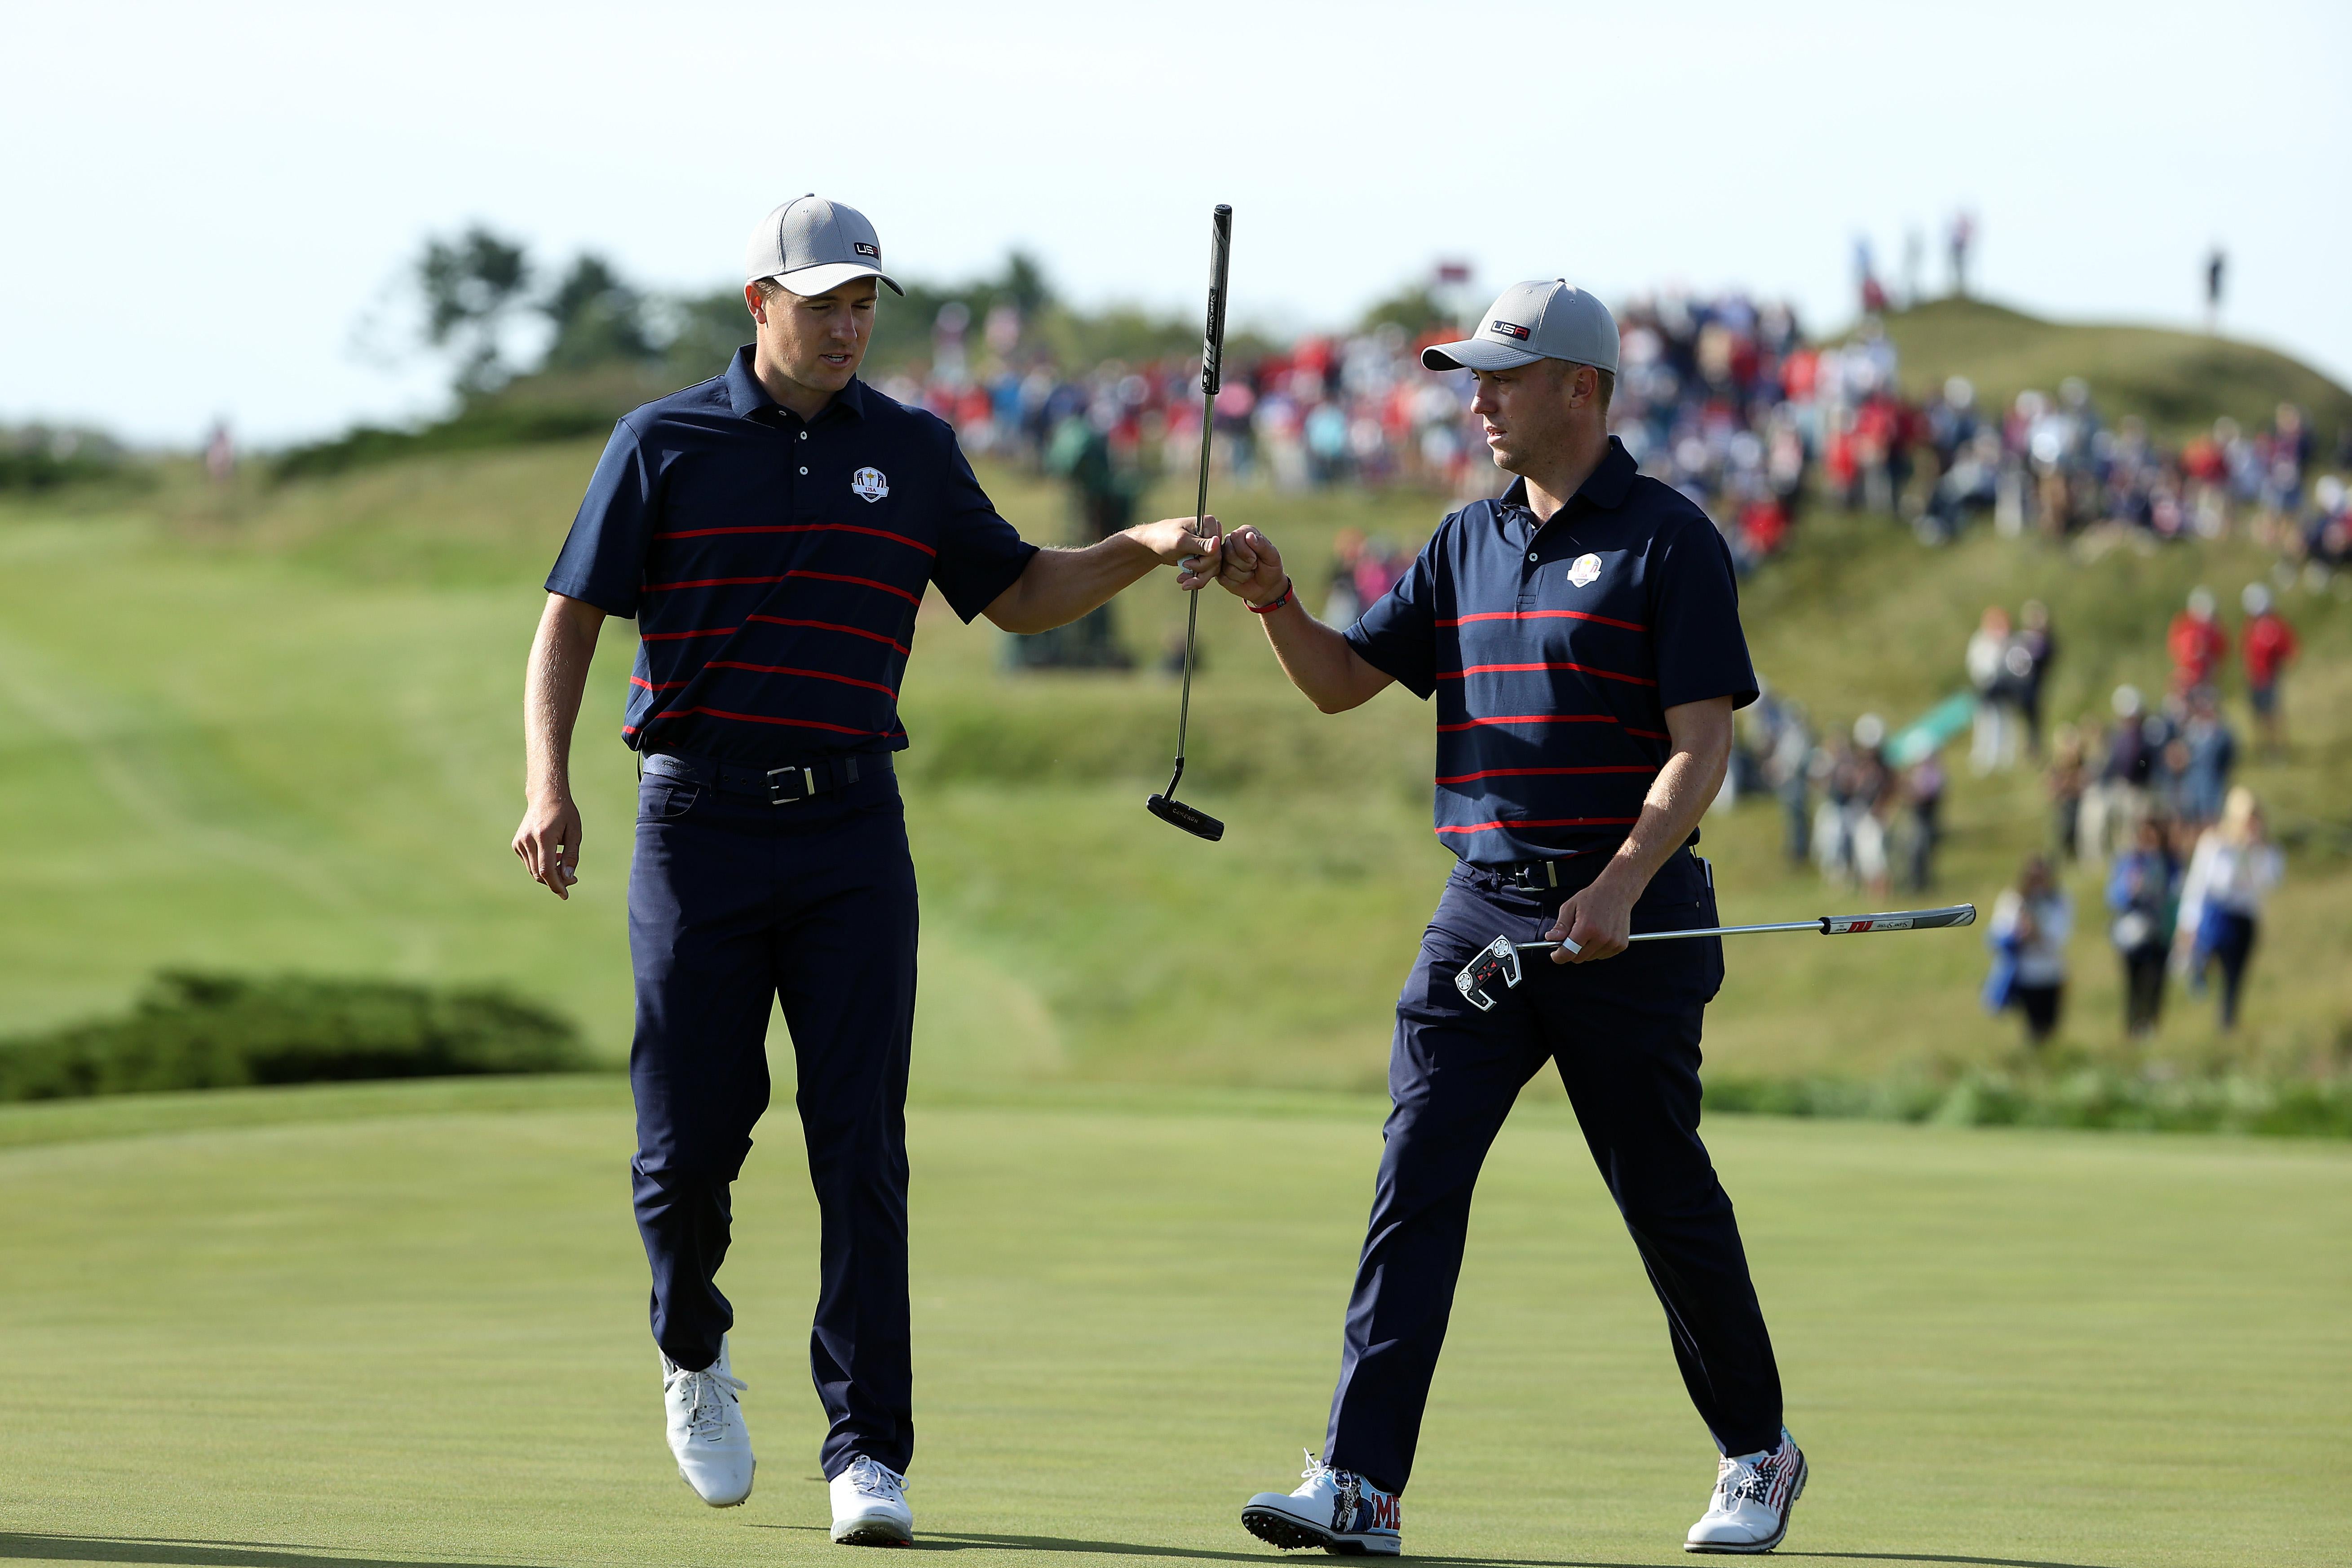 Jordan Spieth and Justin Thomas bump fists on the green of a golf course.